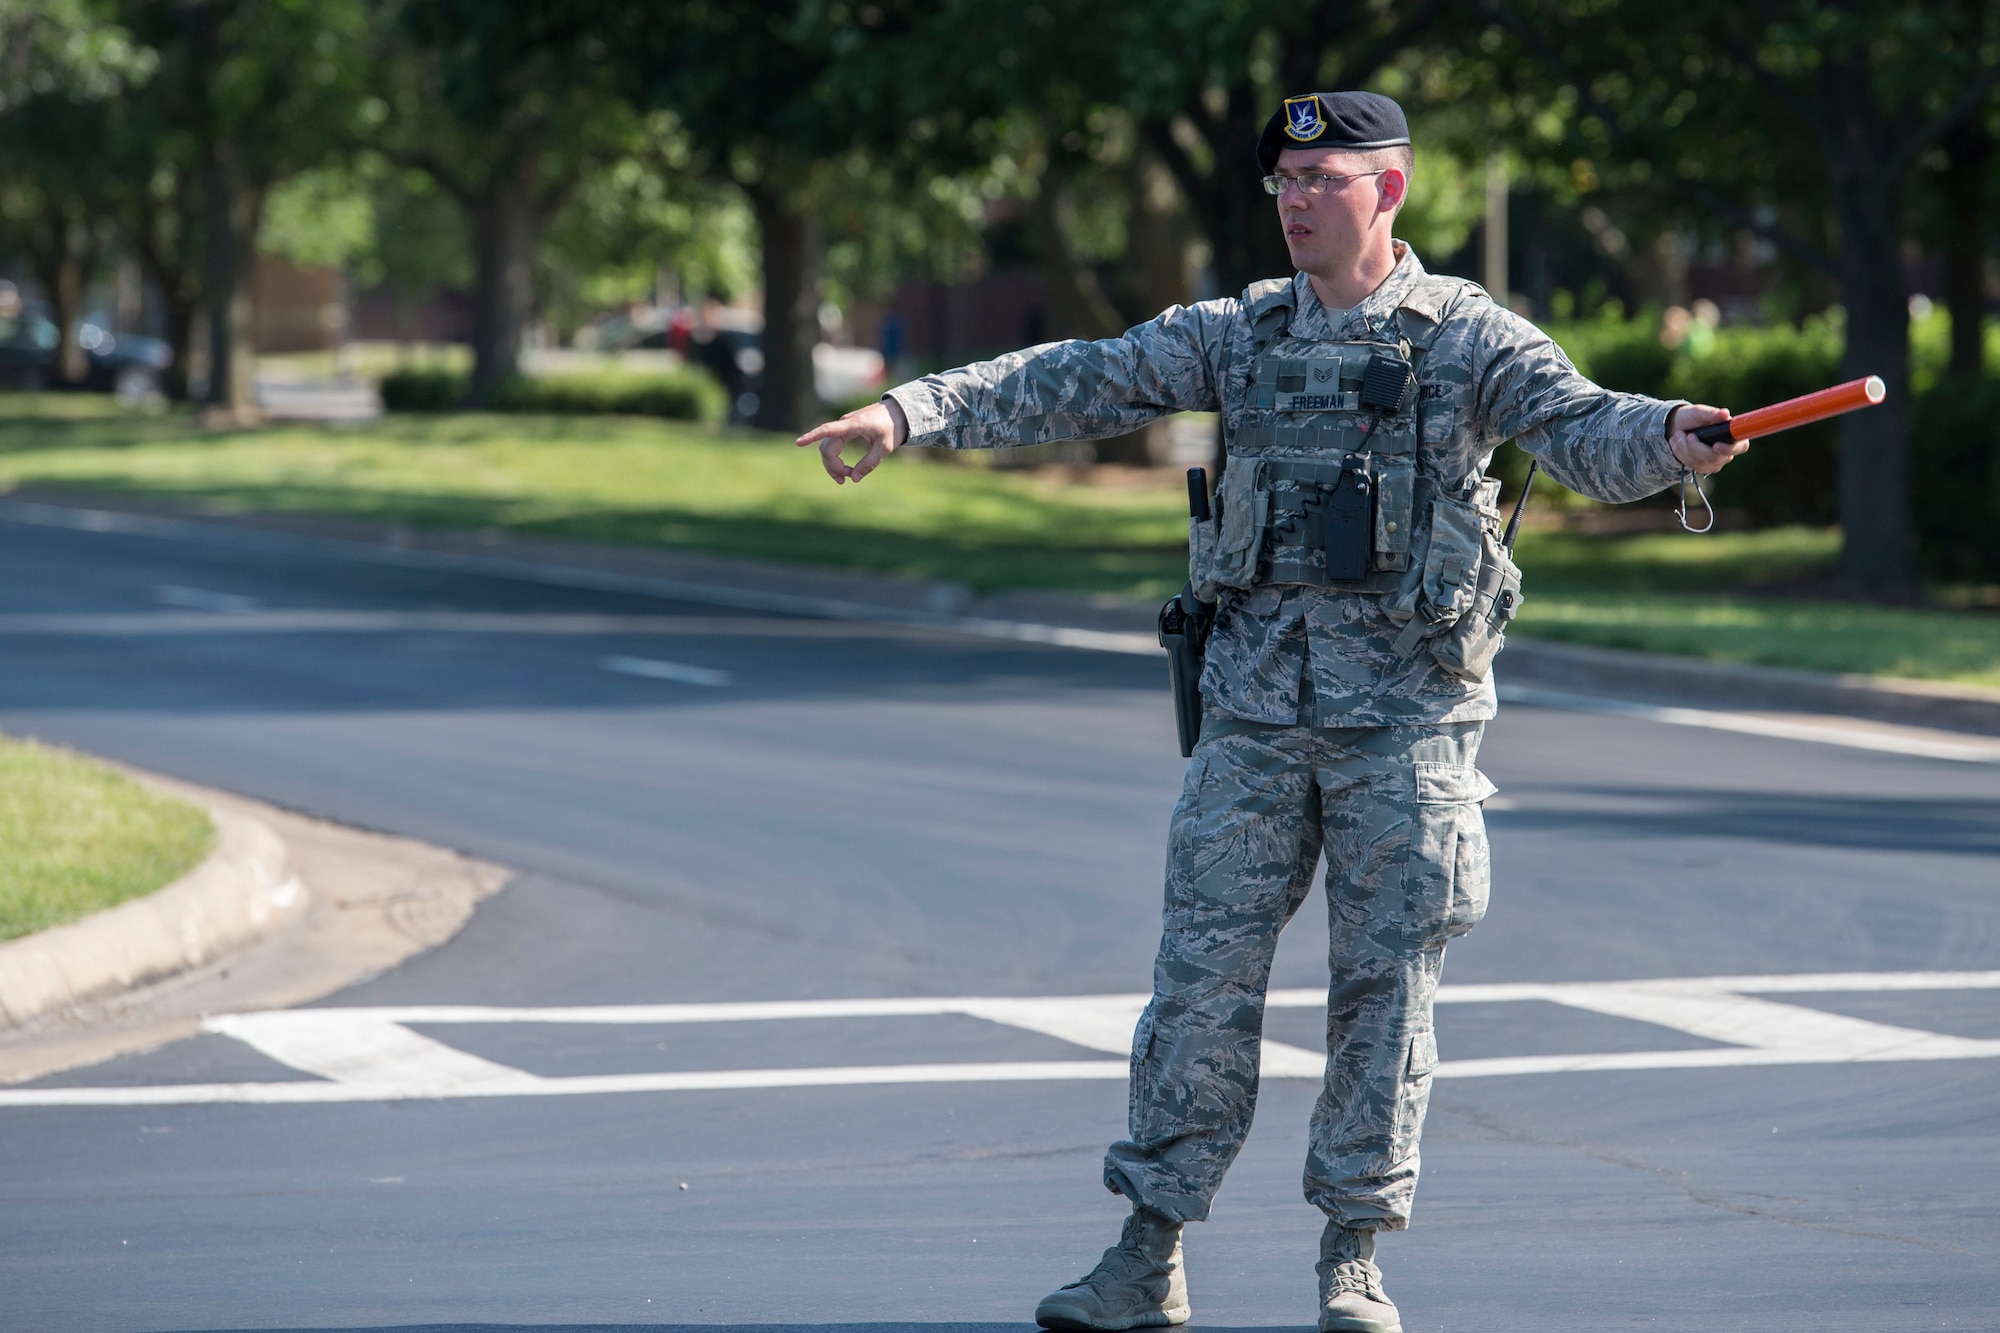 A security forces member directs traffic during the Centennial Celebration Air Show, June 11, 2017, Scott Air Force Base, Ill. Scott AFB opened in 1917, previously named Scott Field, the base has seen its mission evolve and expand to encompass a multitude of priorities, including aeromedical evacuation and communications. (U.S. Air Force photo by Senior Airman Melissa Estevez)